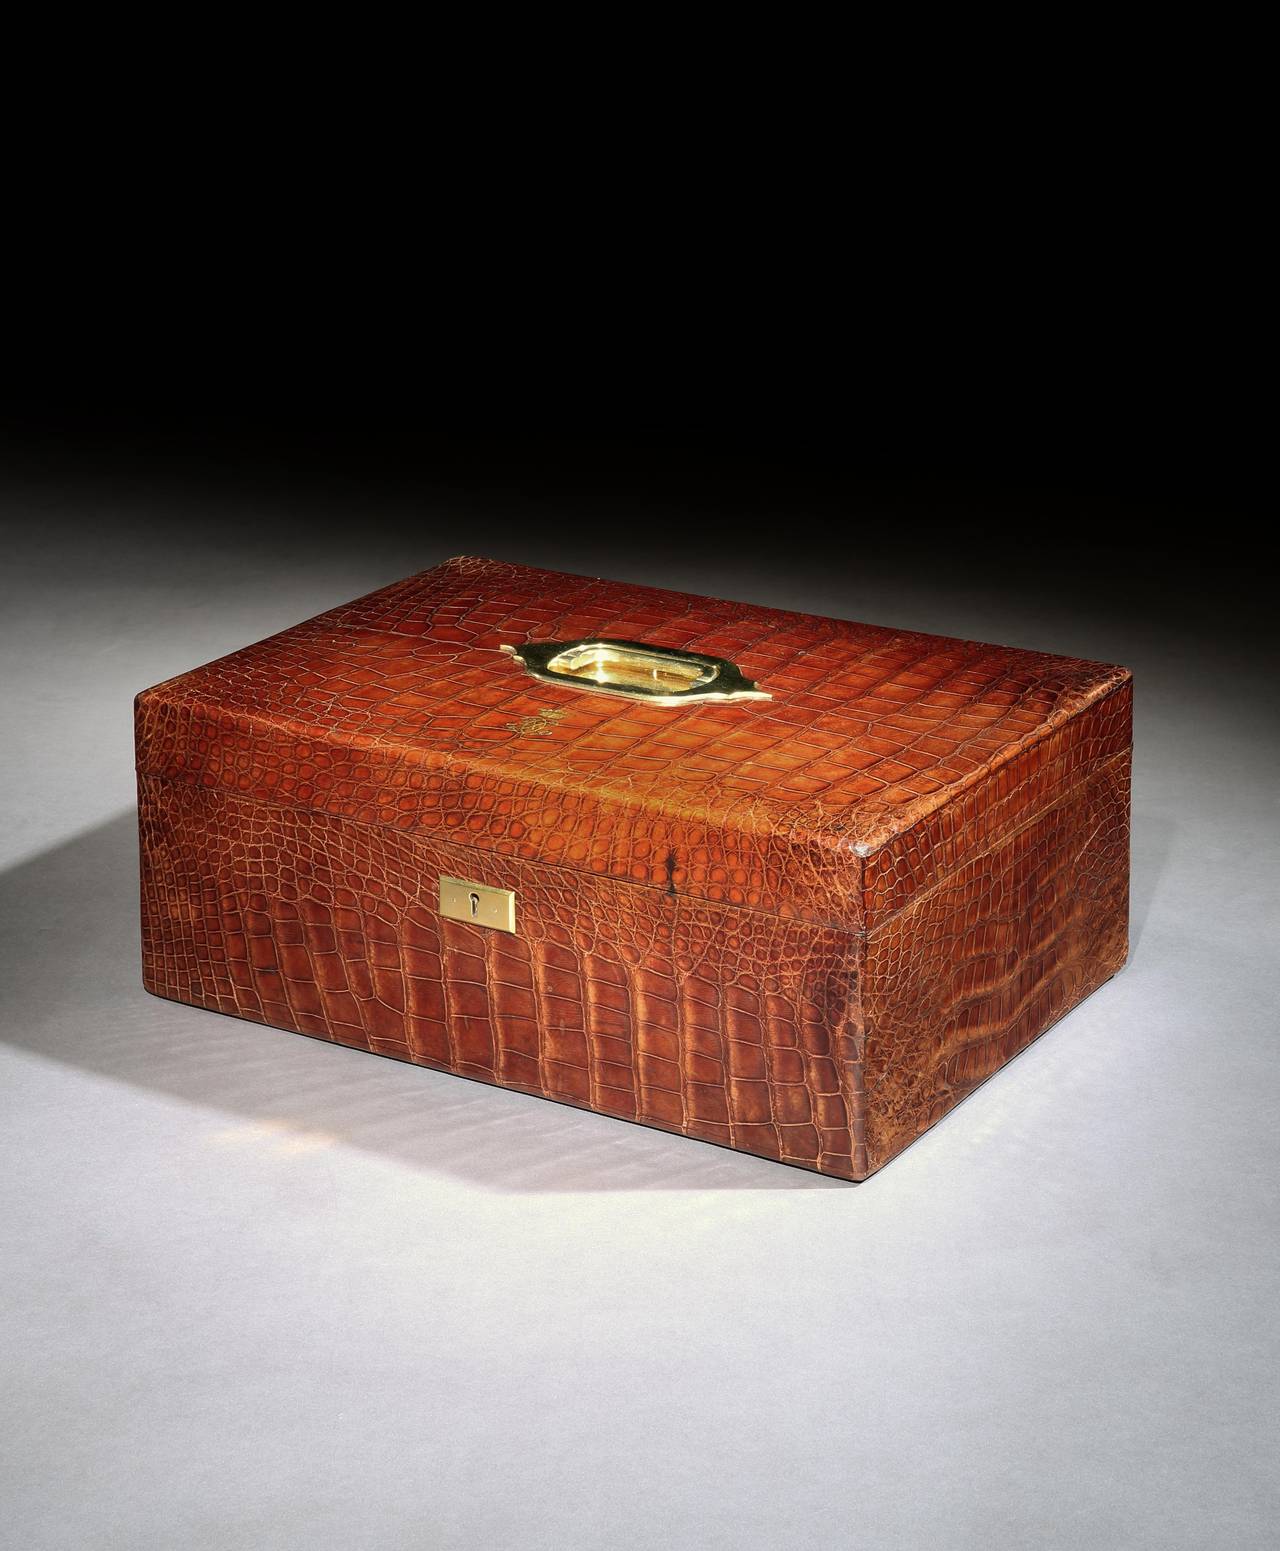 A time warp piece in the form of a Victorian crocodile-hide dispatch box or case, the top of the box with a recessed brass handle and embossed monogram with crown, the Chubb patented lock with original key present. The interior also lined with